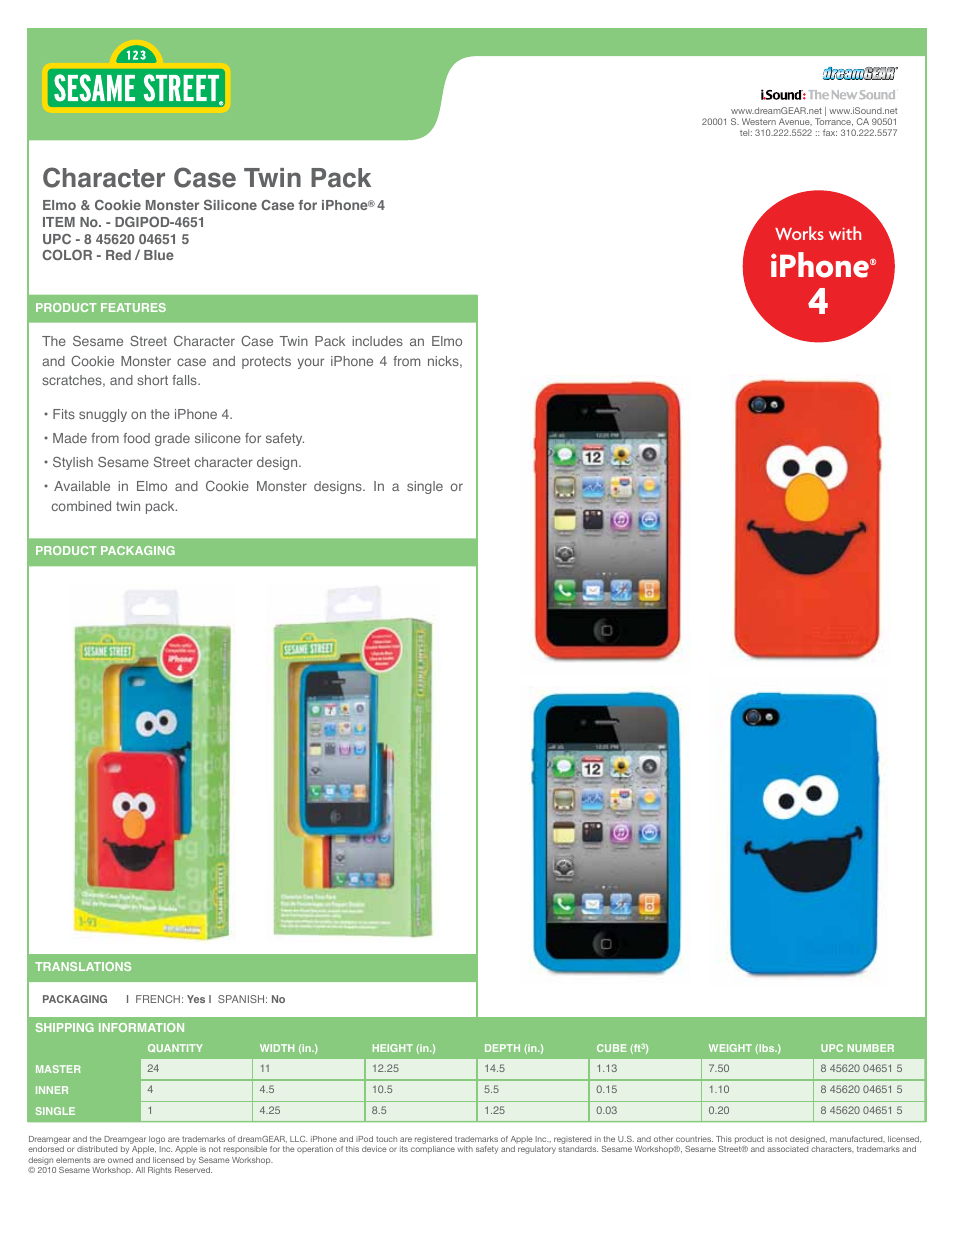 Character Case TWIN PACK for iPhone 4 - Sell Sheet